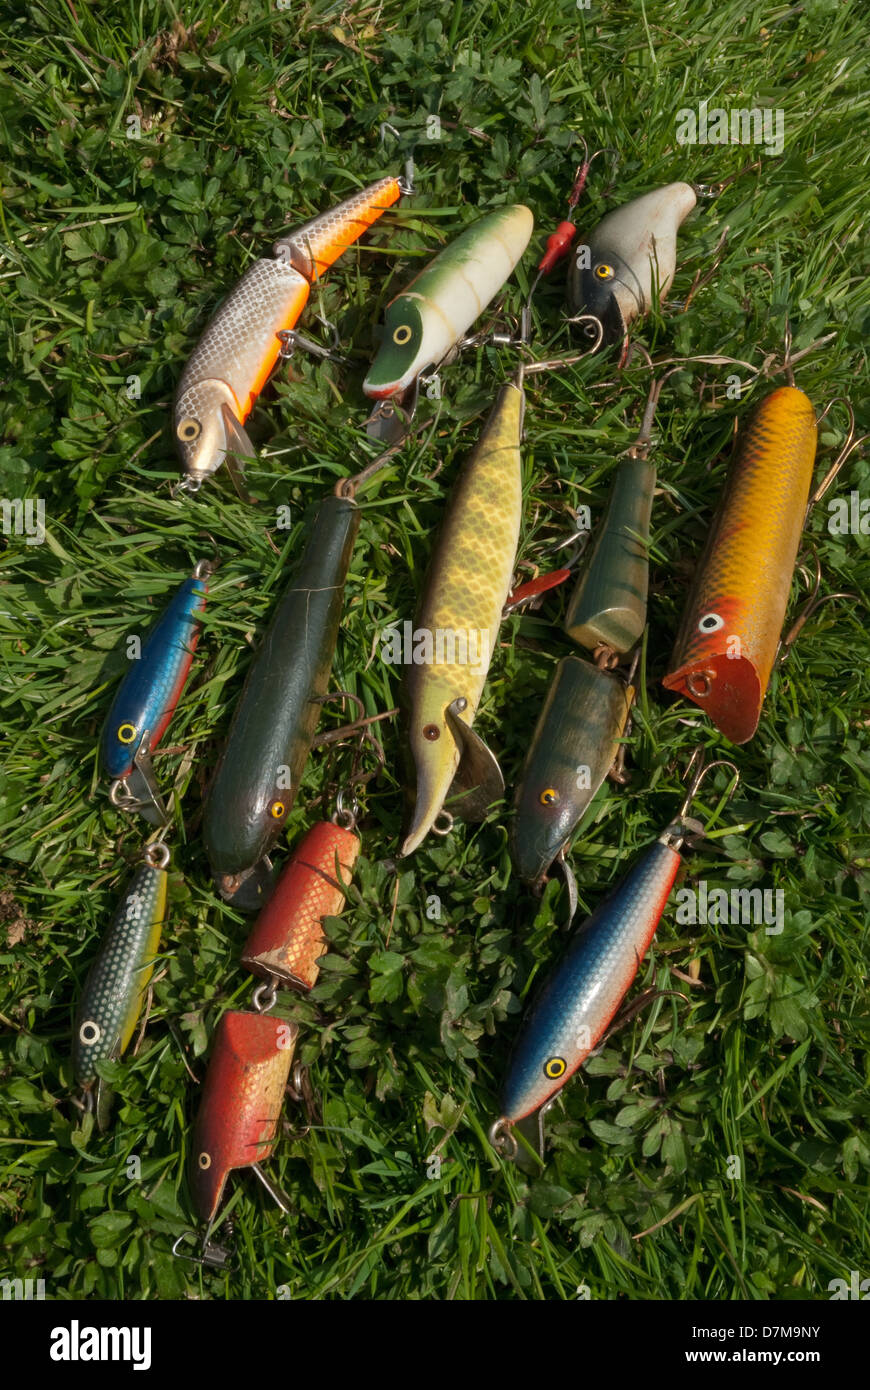 Vintage fishing baits For Sale